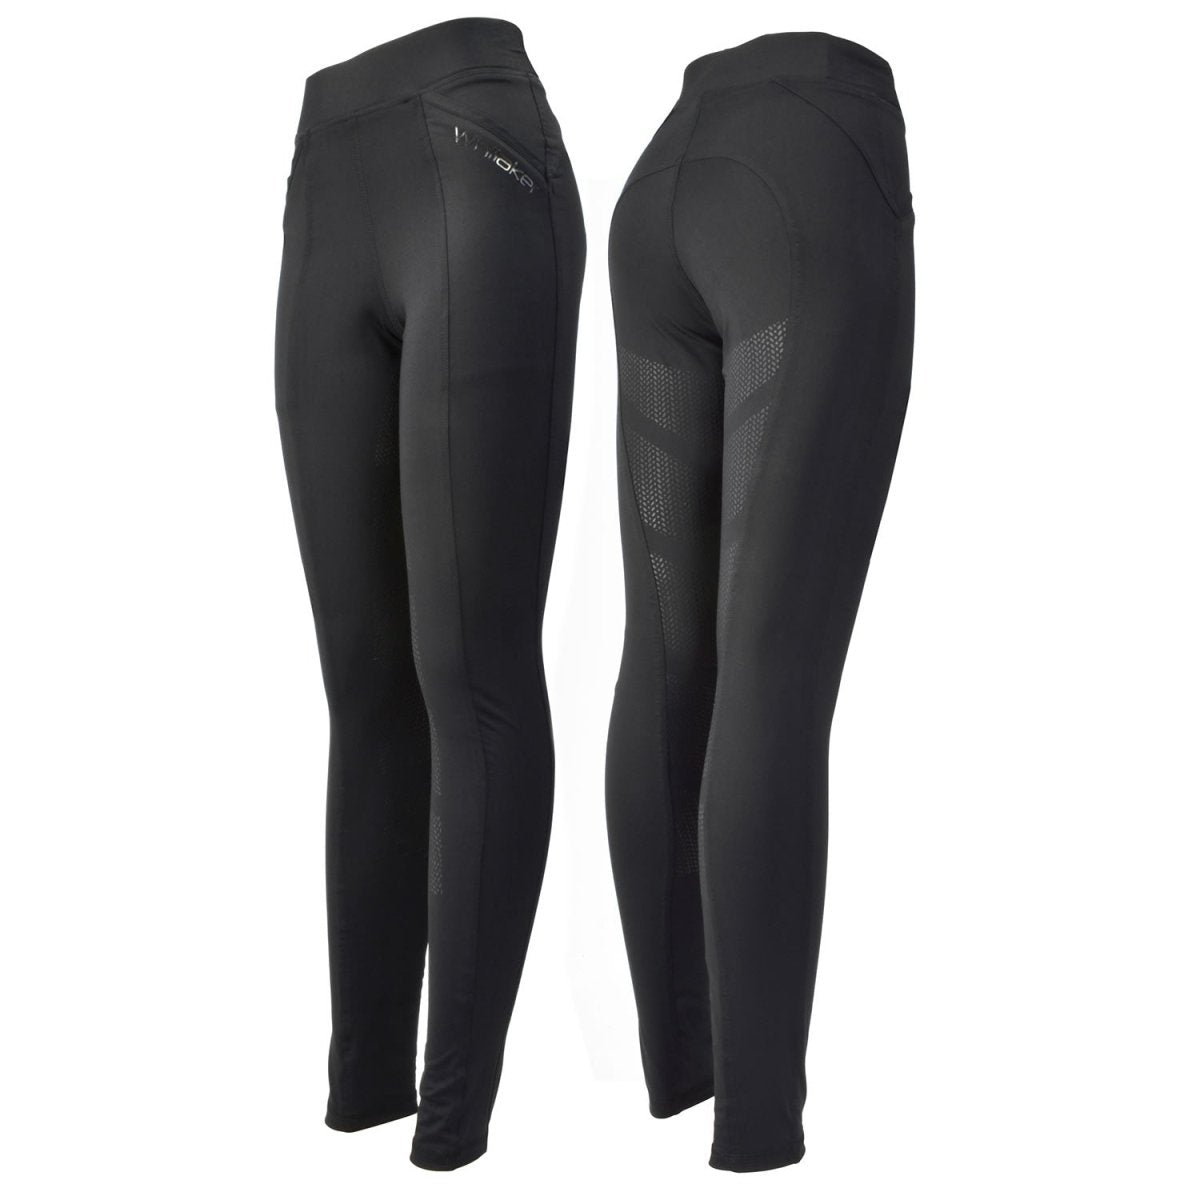 Whitaker Scholes Riding Tights - Black - Small